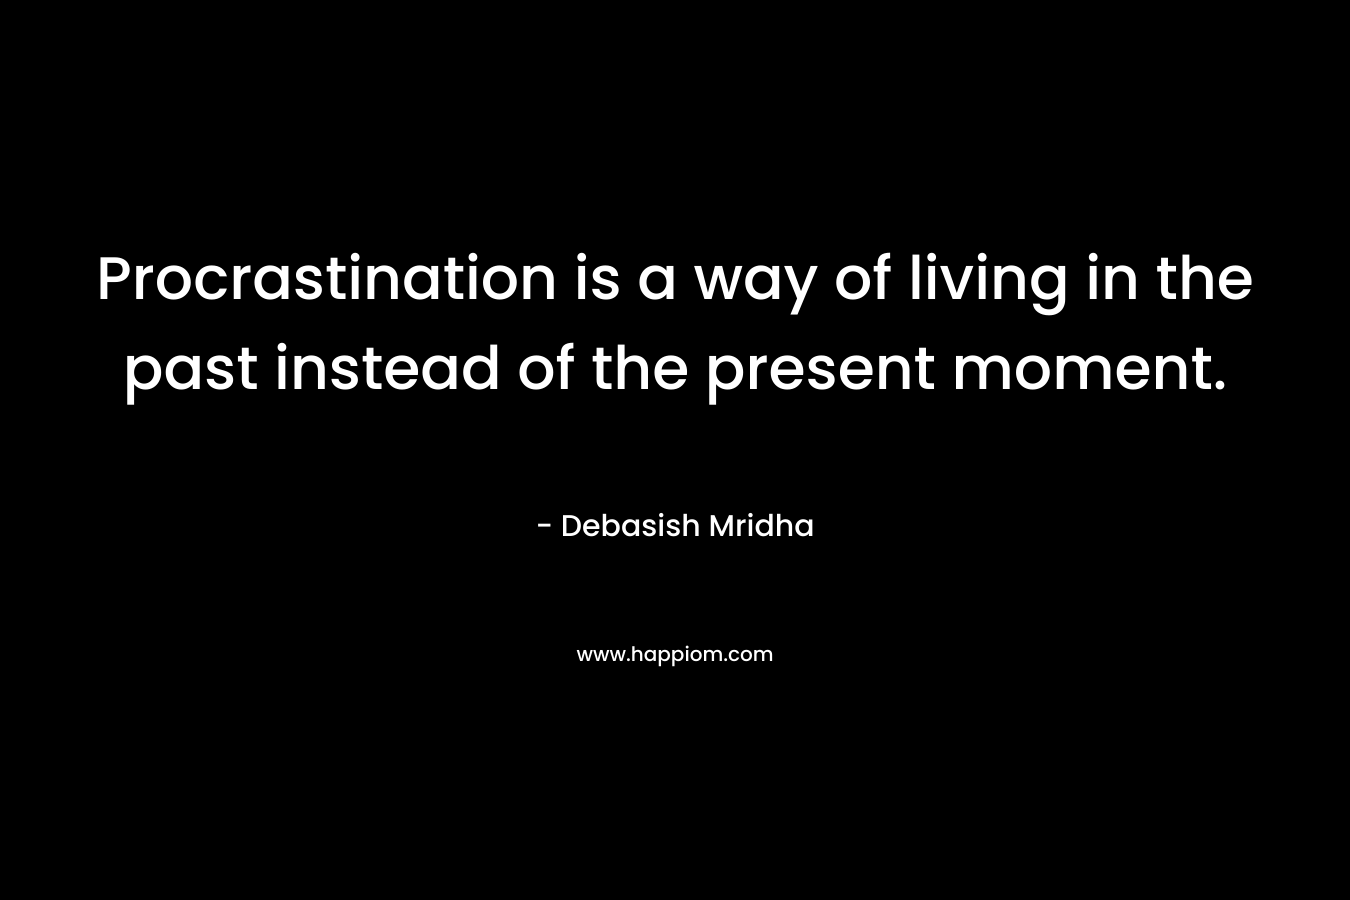 Procrastination is a way of living in the past instead of the present moment.